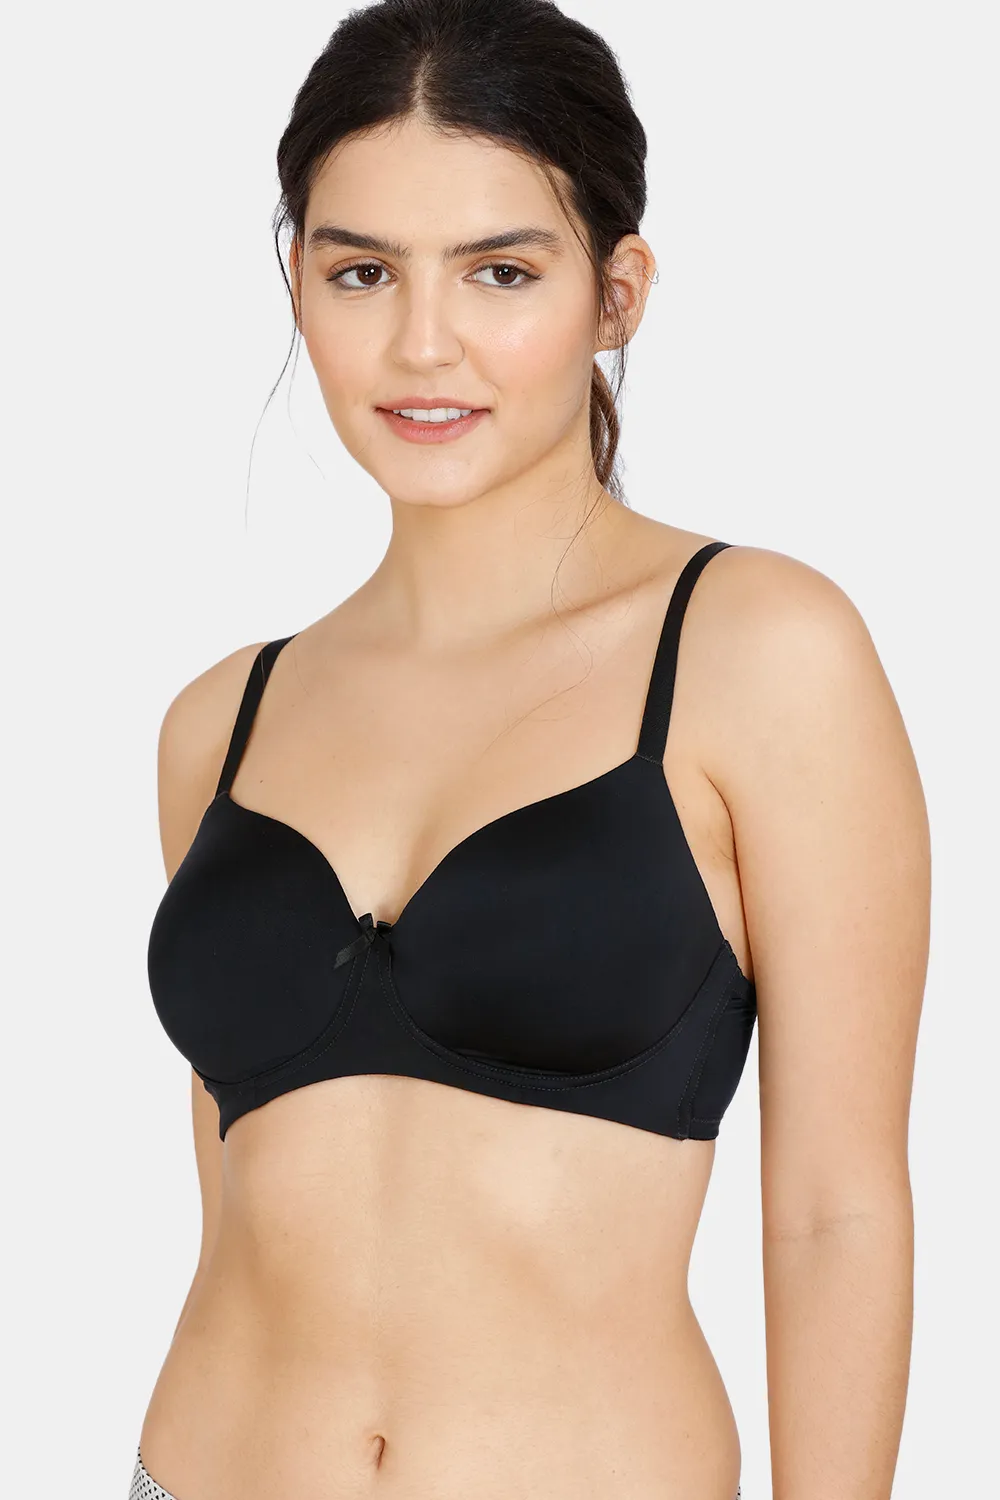 https://cdn.zivame.com/ik-seo/media/catalog/product/2/_/2_12_16/zivame-copper-infused-padded-non-wired-3-4th-coverage-t-shirt-bra-with-low-rise-panty-anthracite.jpg